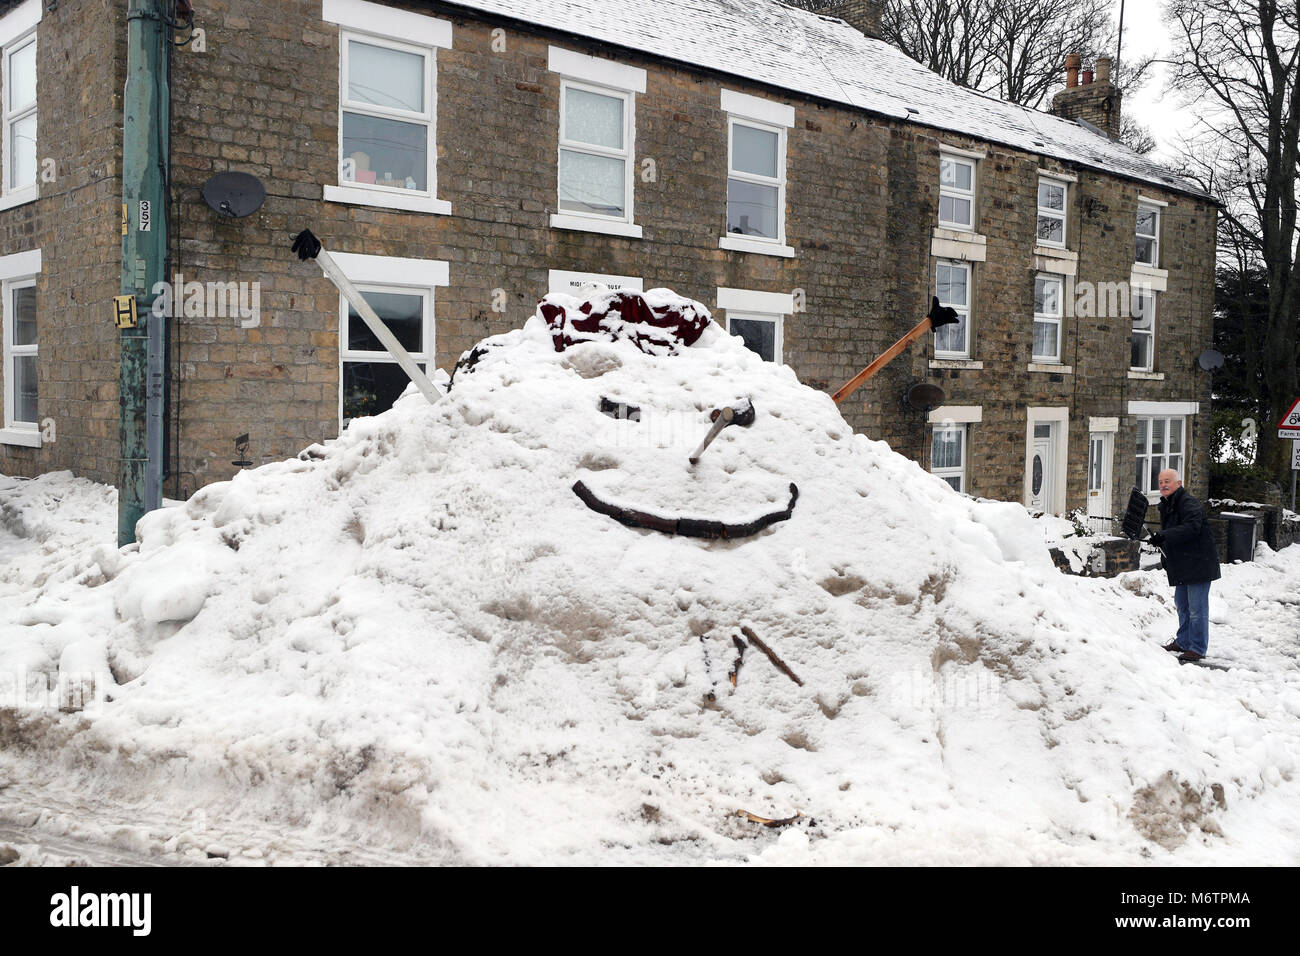 A man stands by a giant snowman resembling Star Wars character Jabba the Hutt, built at St Johns Chapple in Weardale in County Durham. Stock Photo